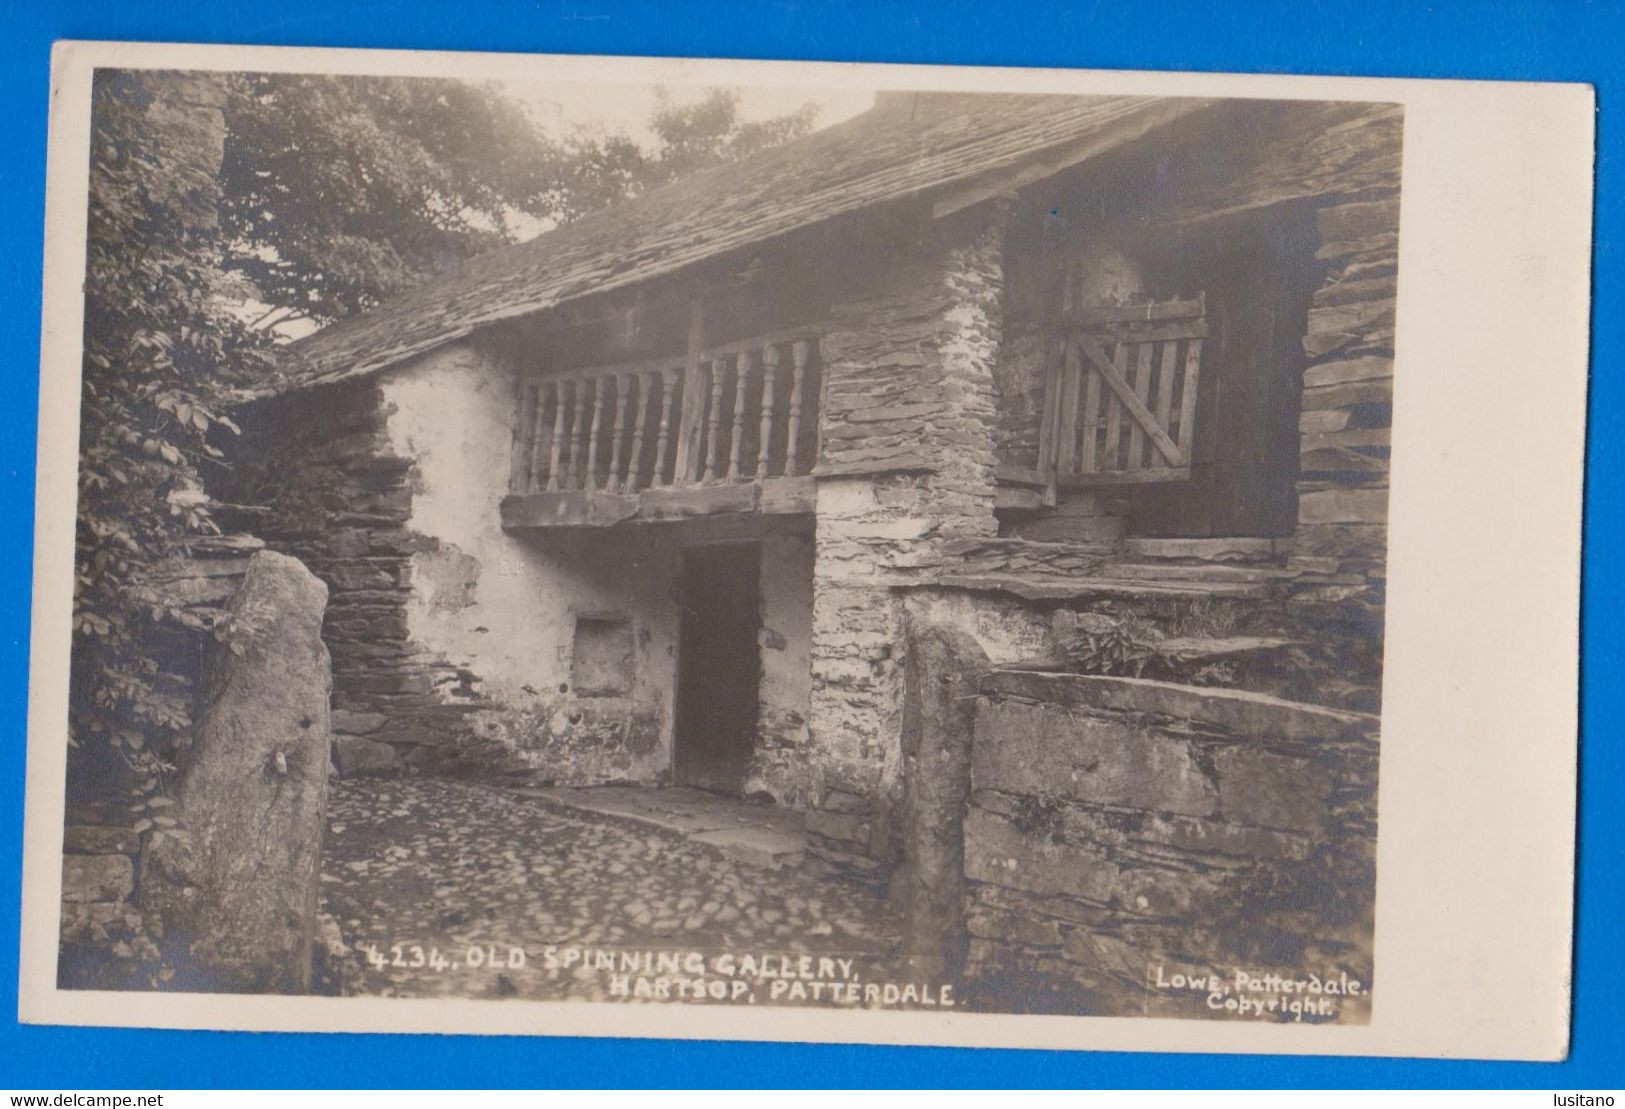 Cumberland/ Westmorland - HARTSOP - OLD LAKELAND SPINNING GALLERY - TYPICAL HOUSE - REAL PHOTO BY LOWE PATTERDALE - Patterdale